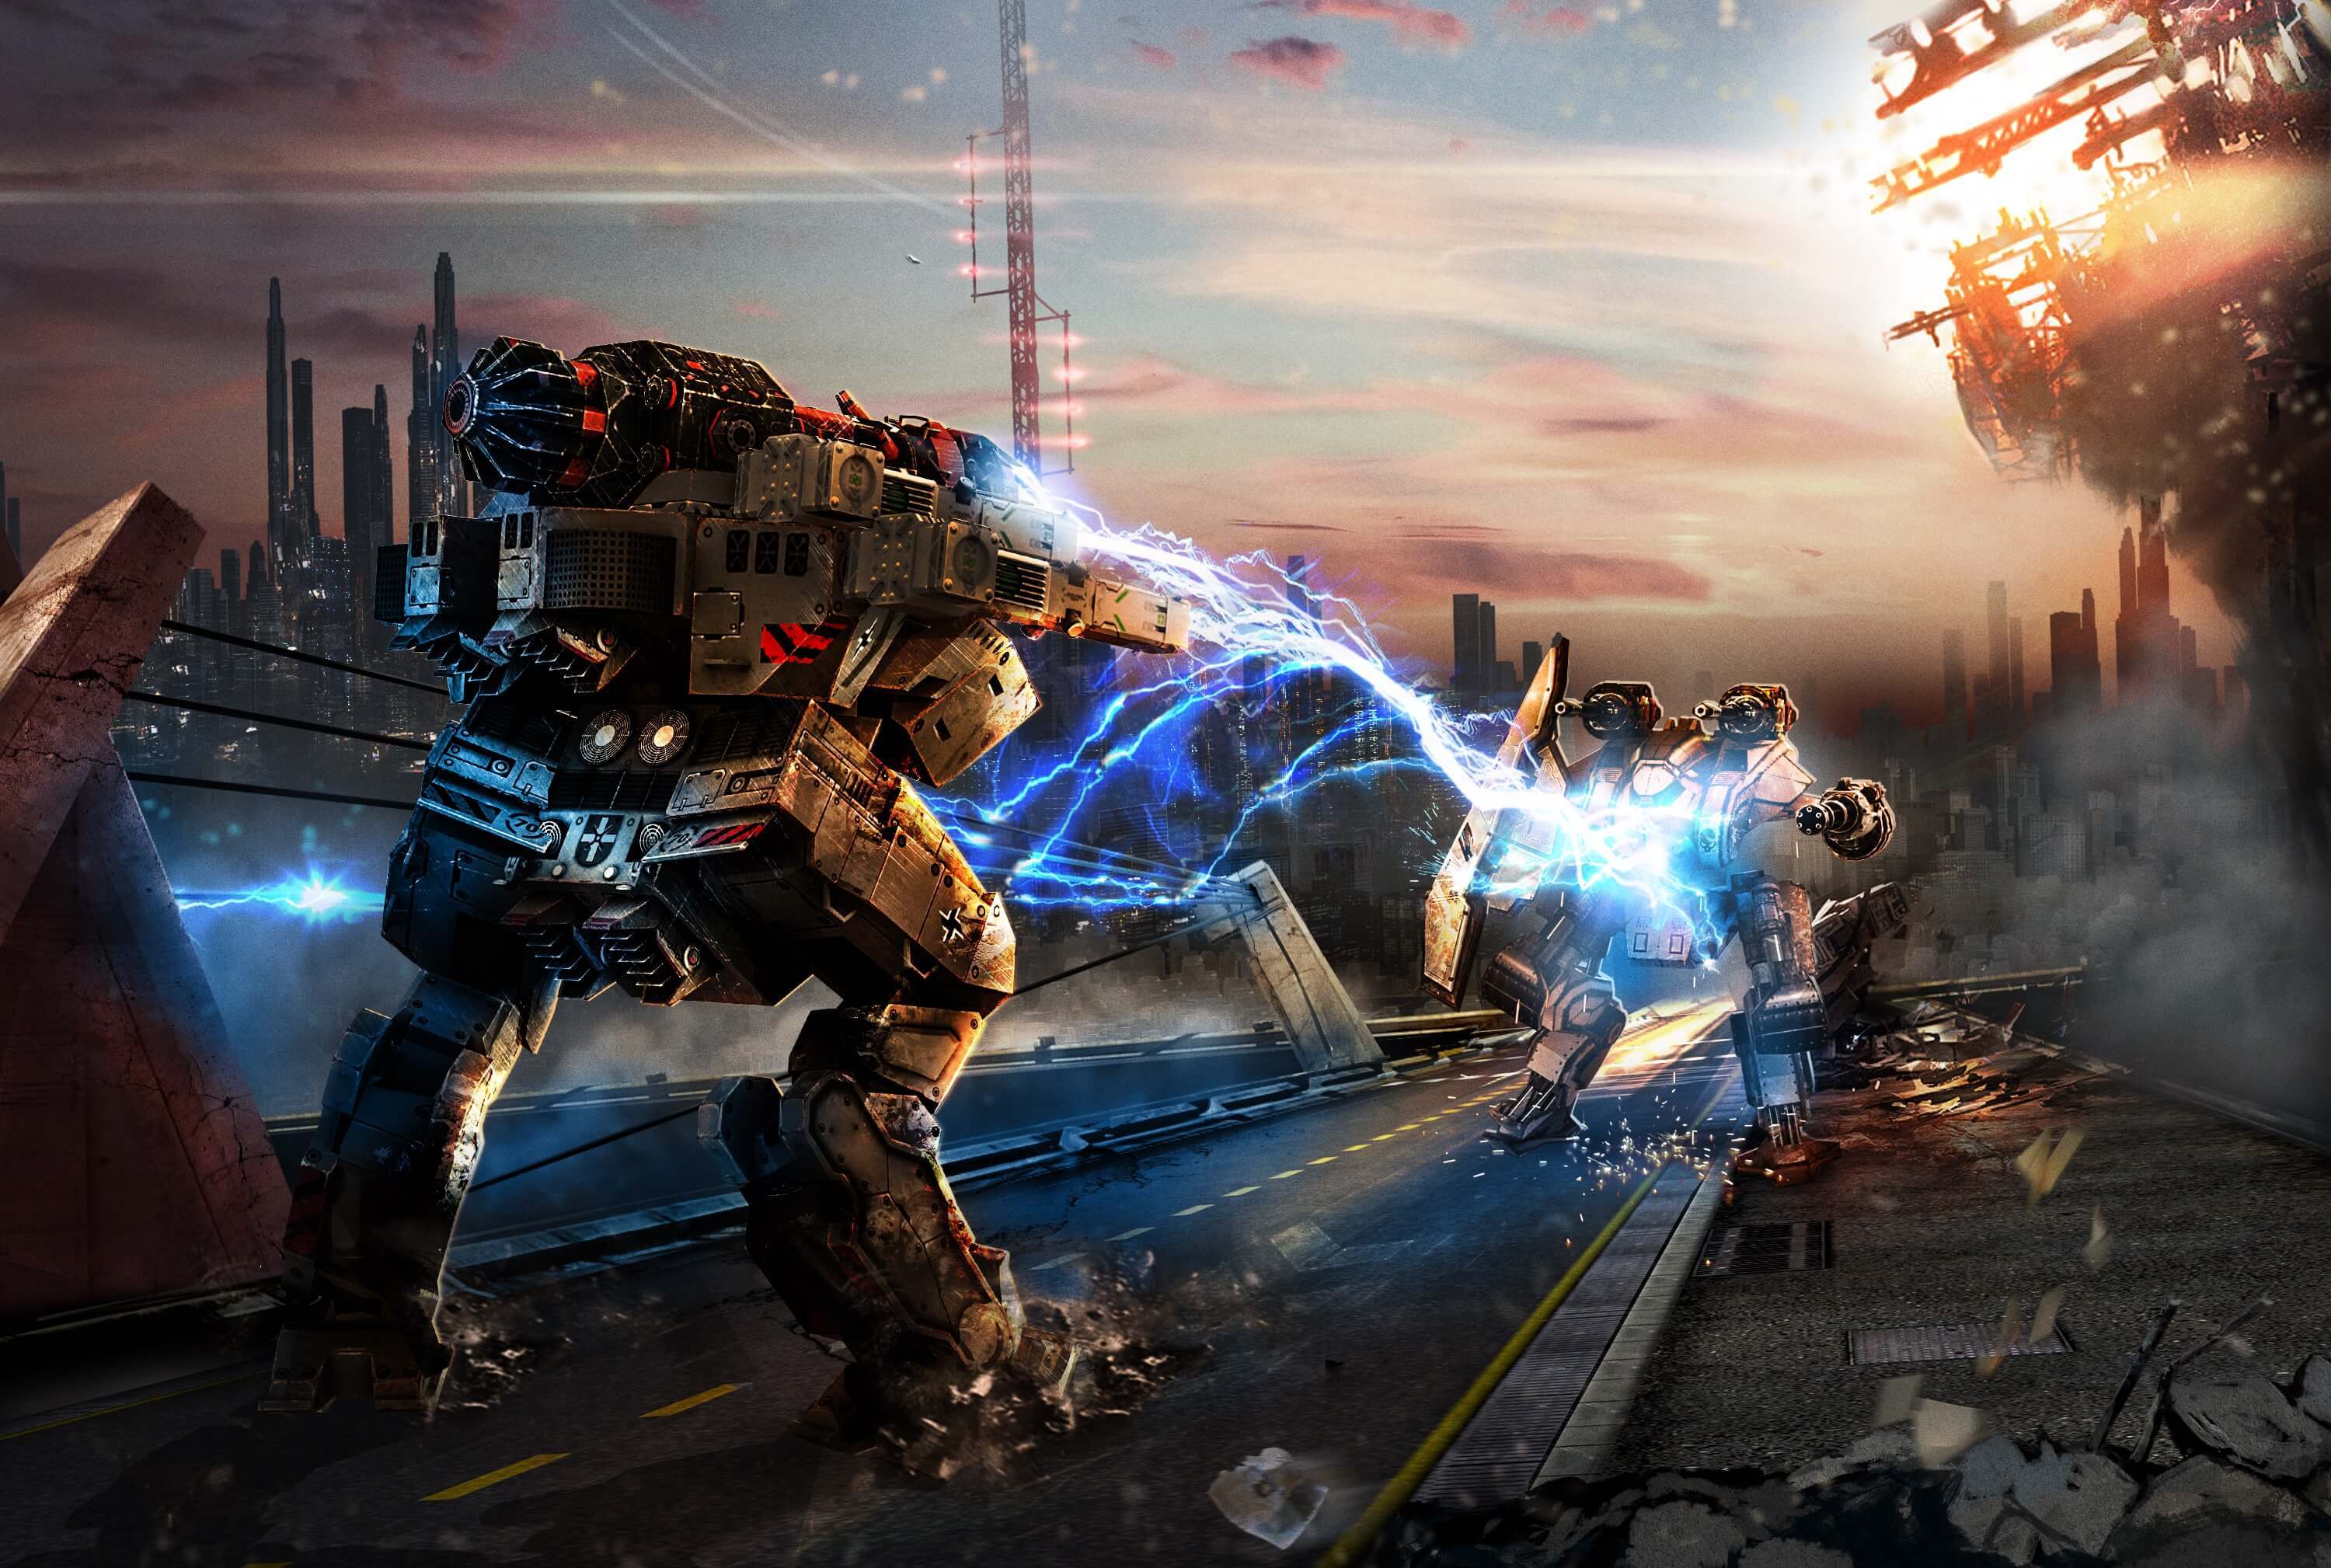 war robots wallpaper,pc game,action adventure game,strategy video game,games,cg artwork